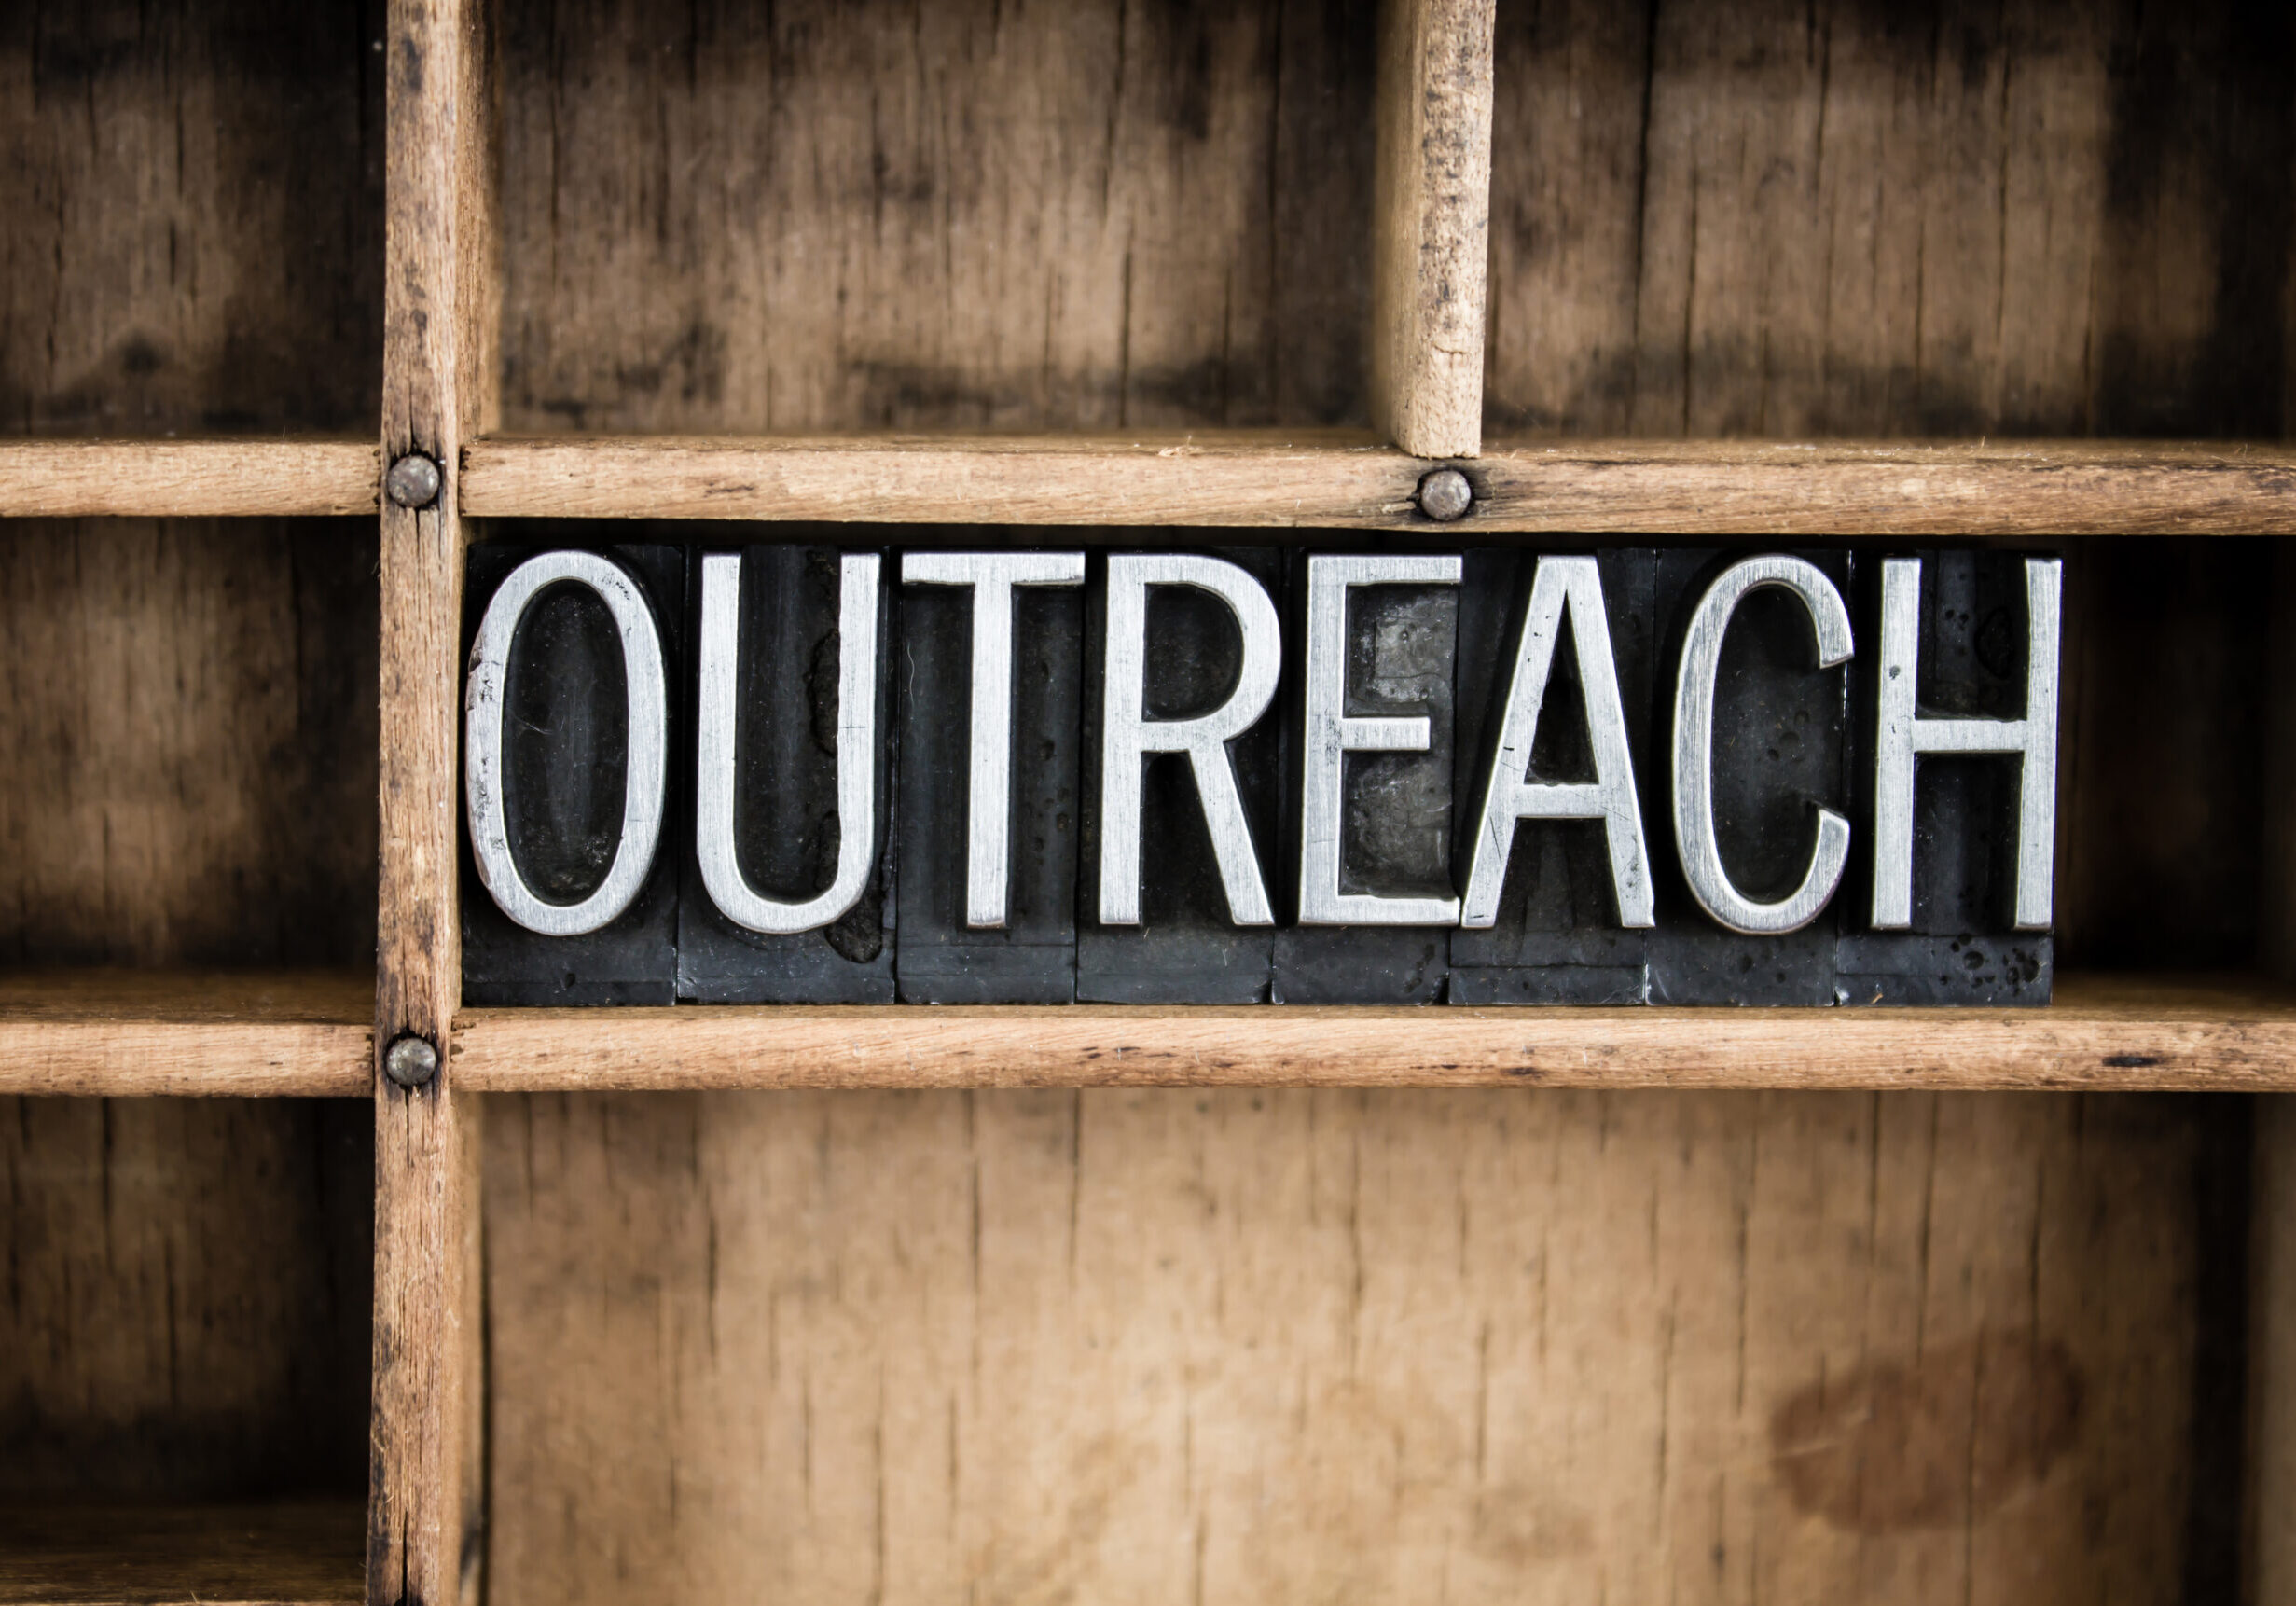 The word "OUTREACH" written in vintage metal letterpress type in a wooden drawer with dividers.